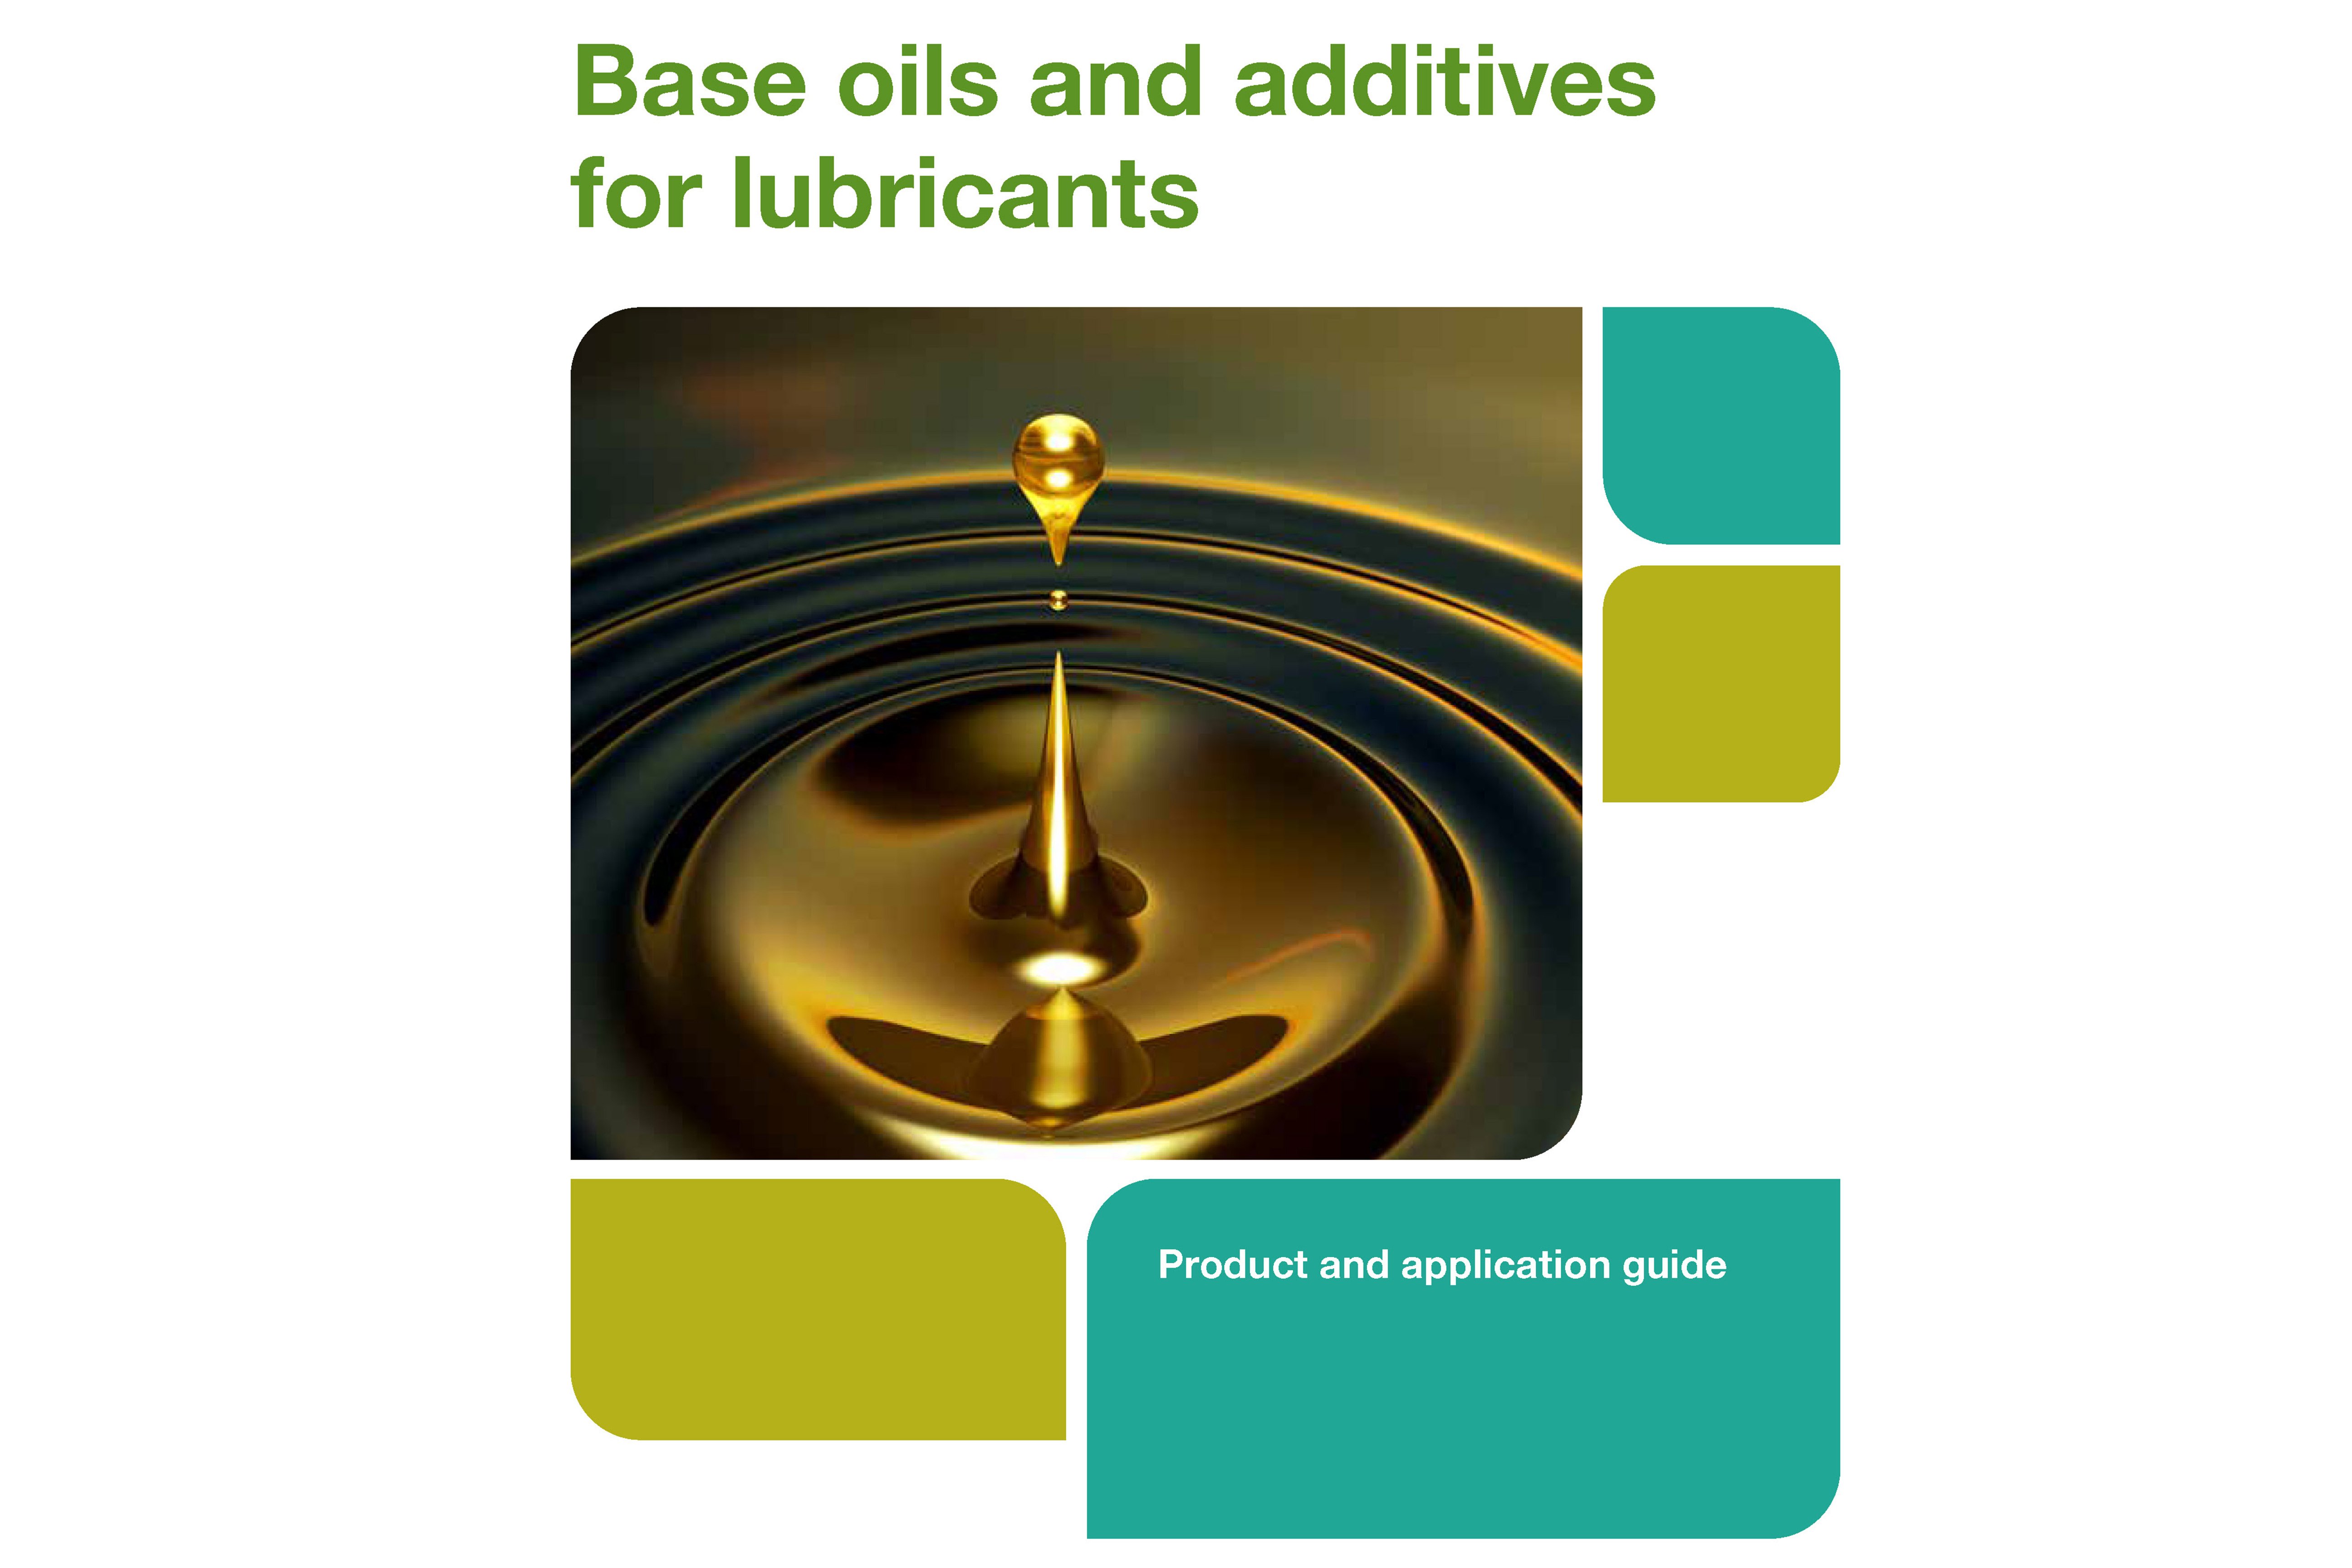 Cover of lubricant product guide